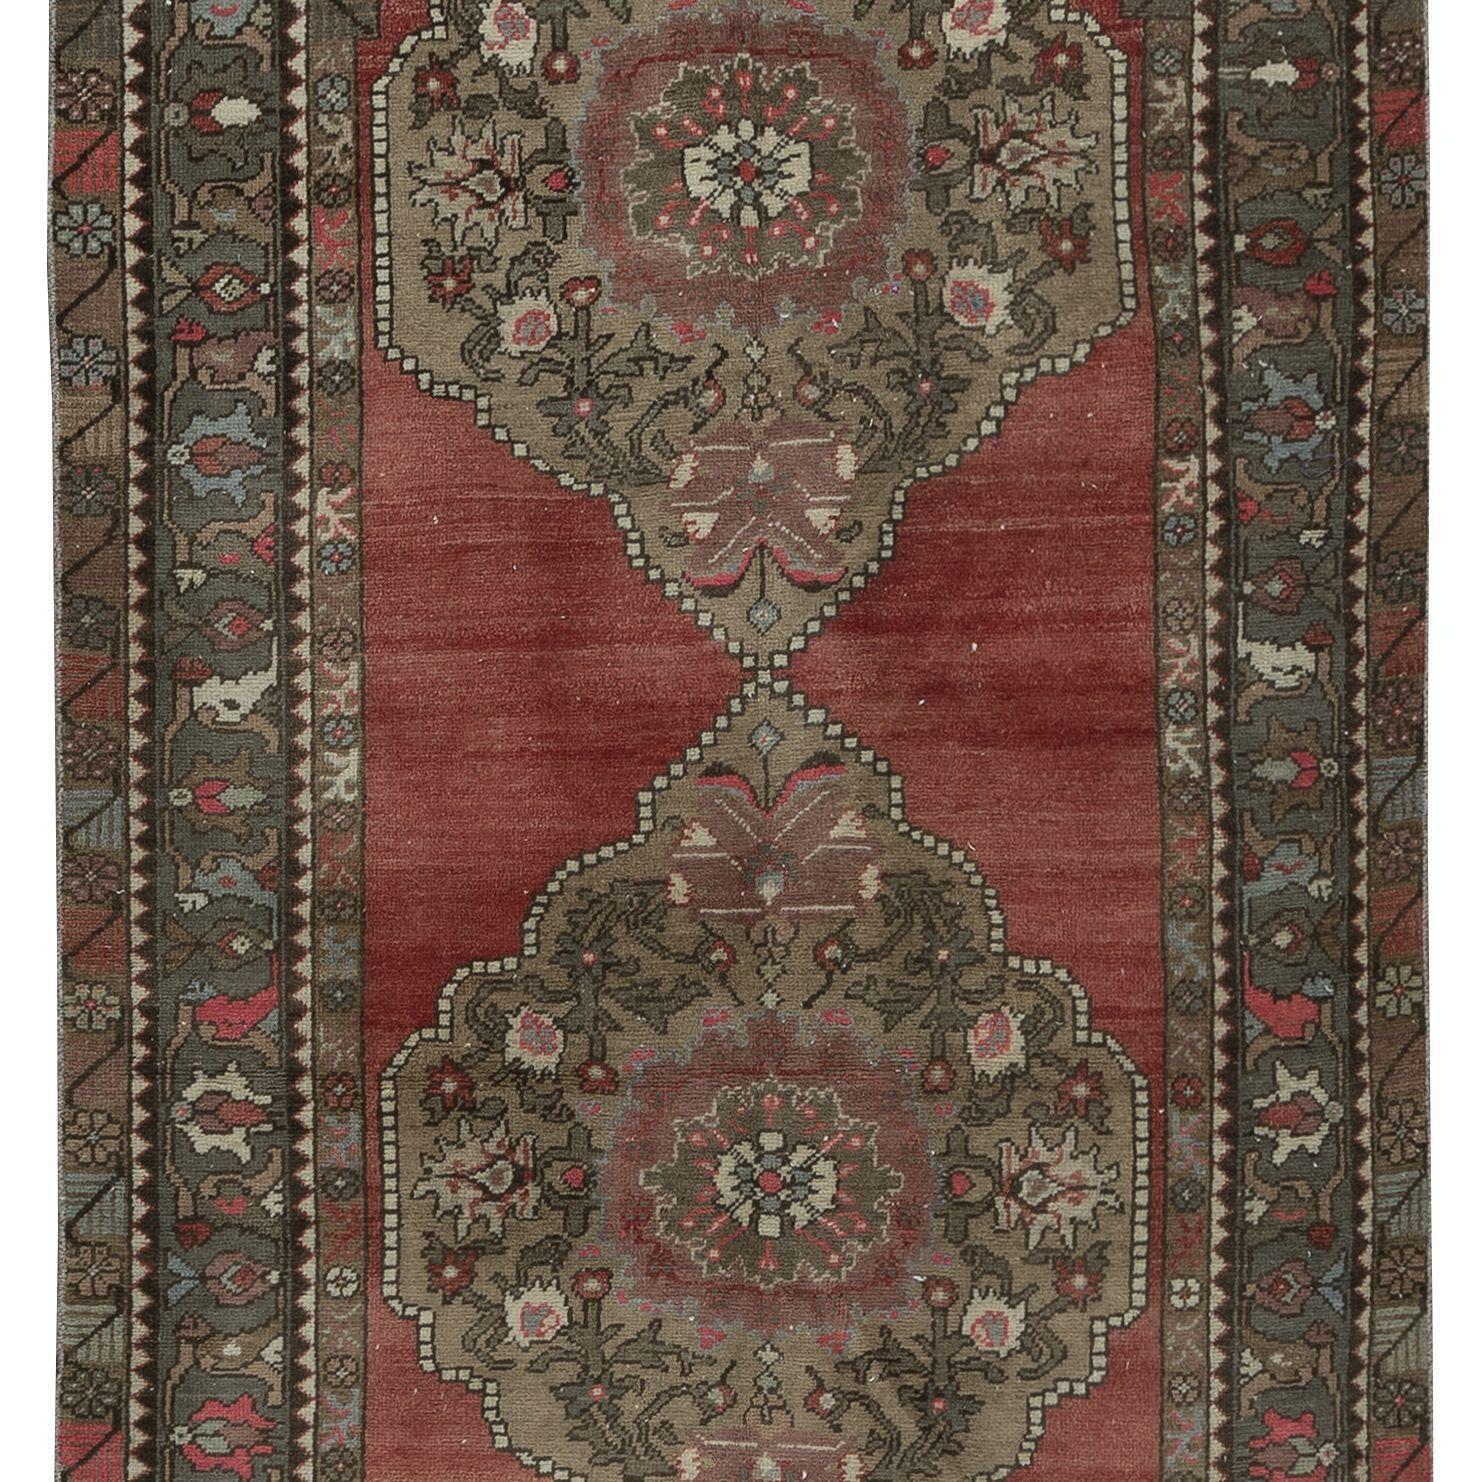 4x12.4 Ft Traditional Vintage Handmade Turkish Hallway Runner Rug, 100% Wool In Good Condition For Sale In Philadelphia, PA